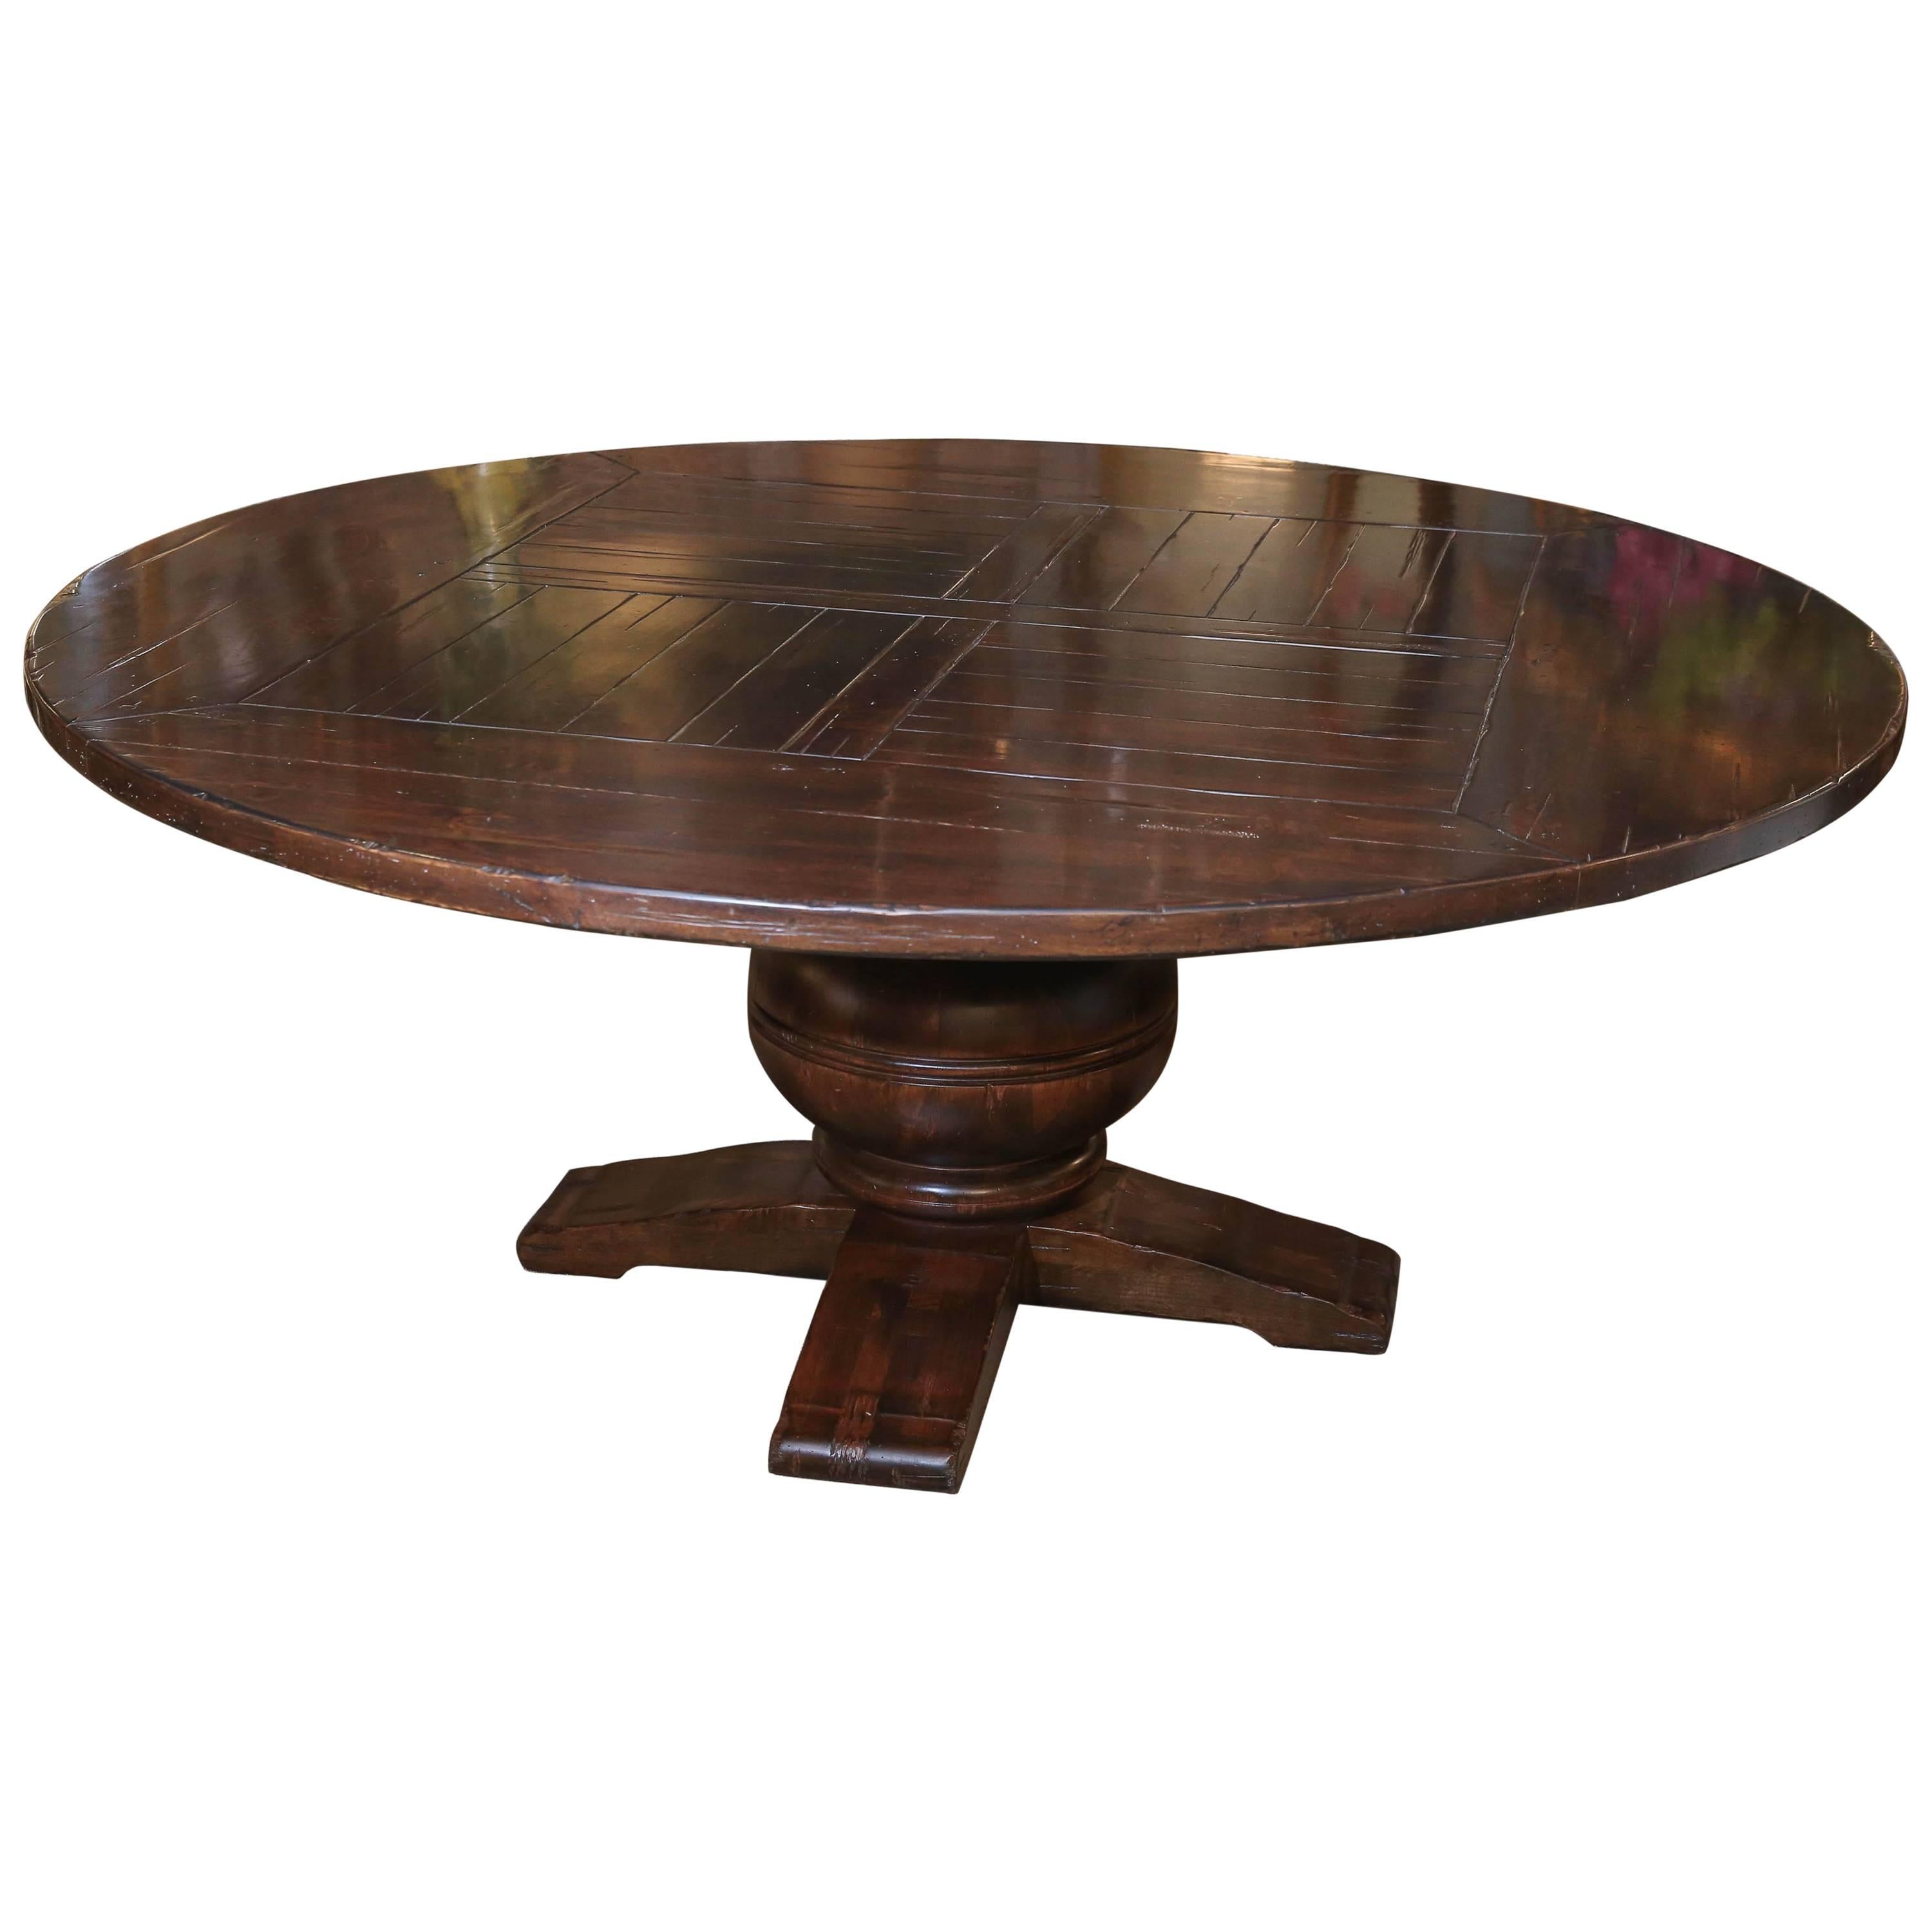 Large Round Dining Table with Distressed Finish in Dark Pine